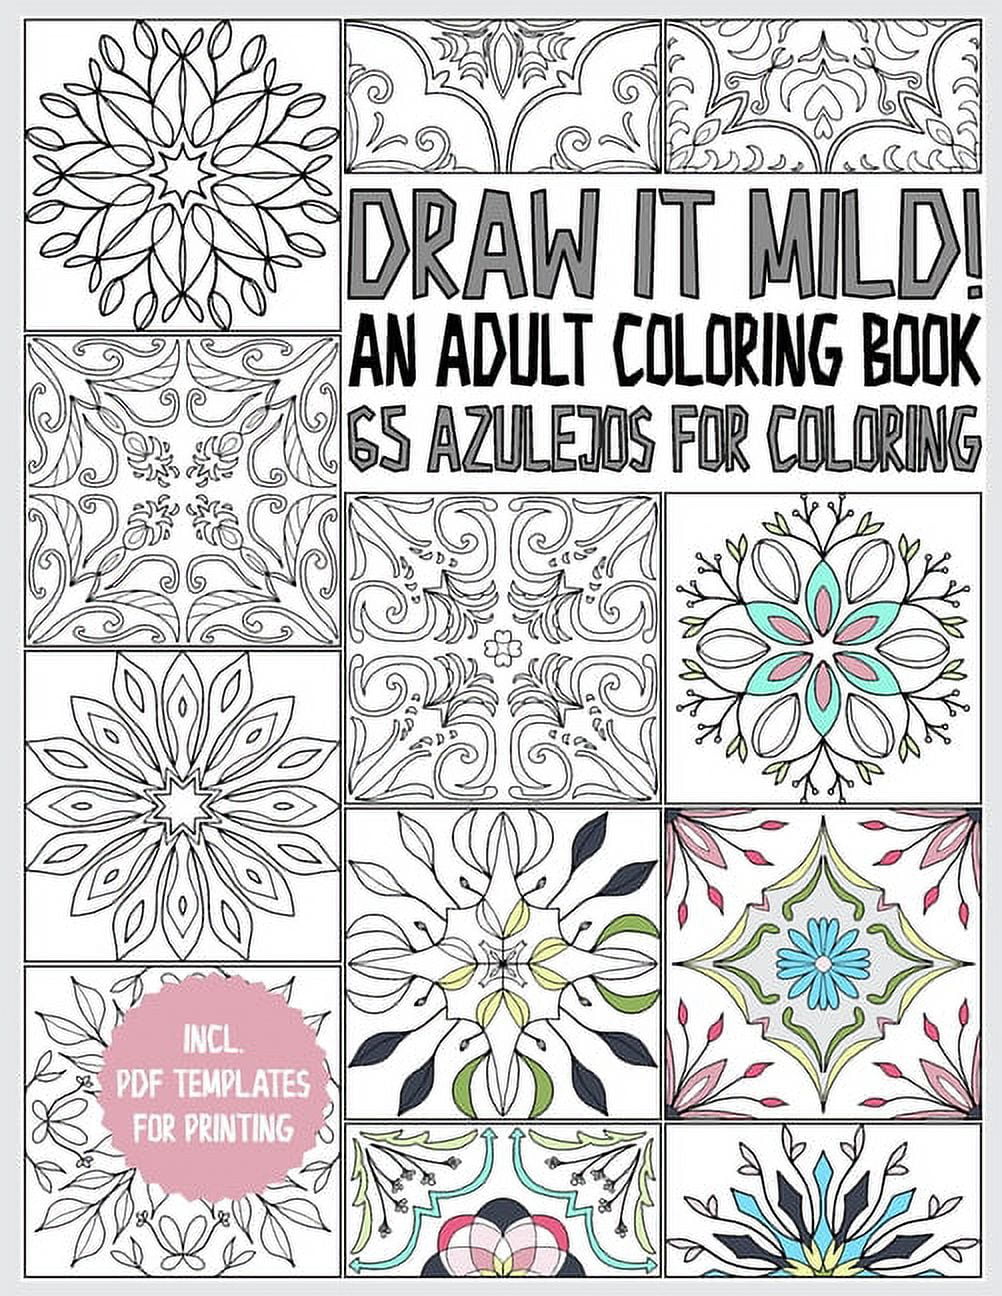 Coloring book for adults - Relaxation patterns By: Coco Wyo